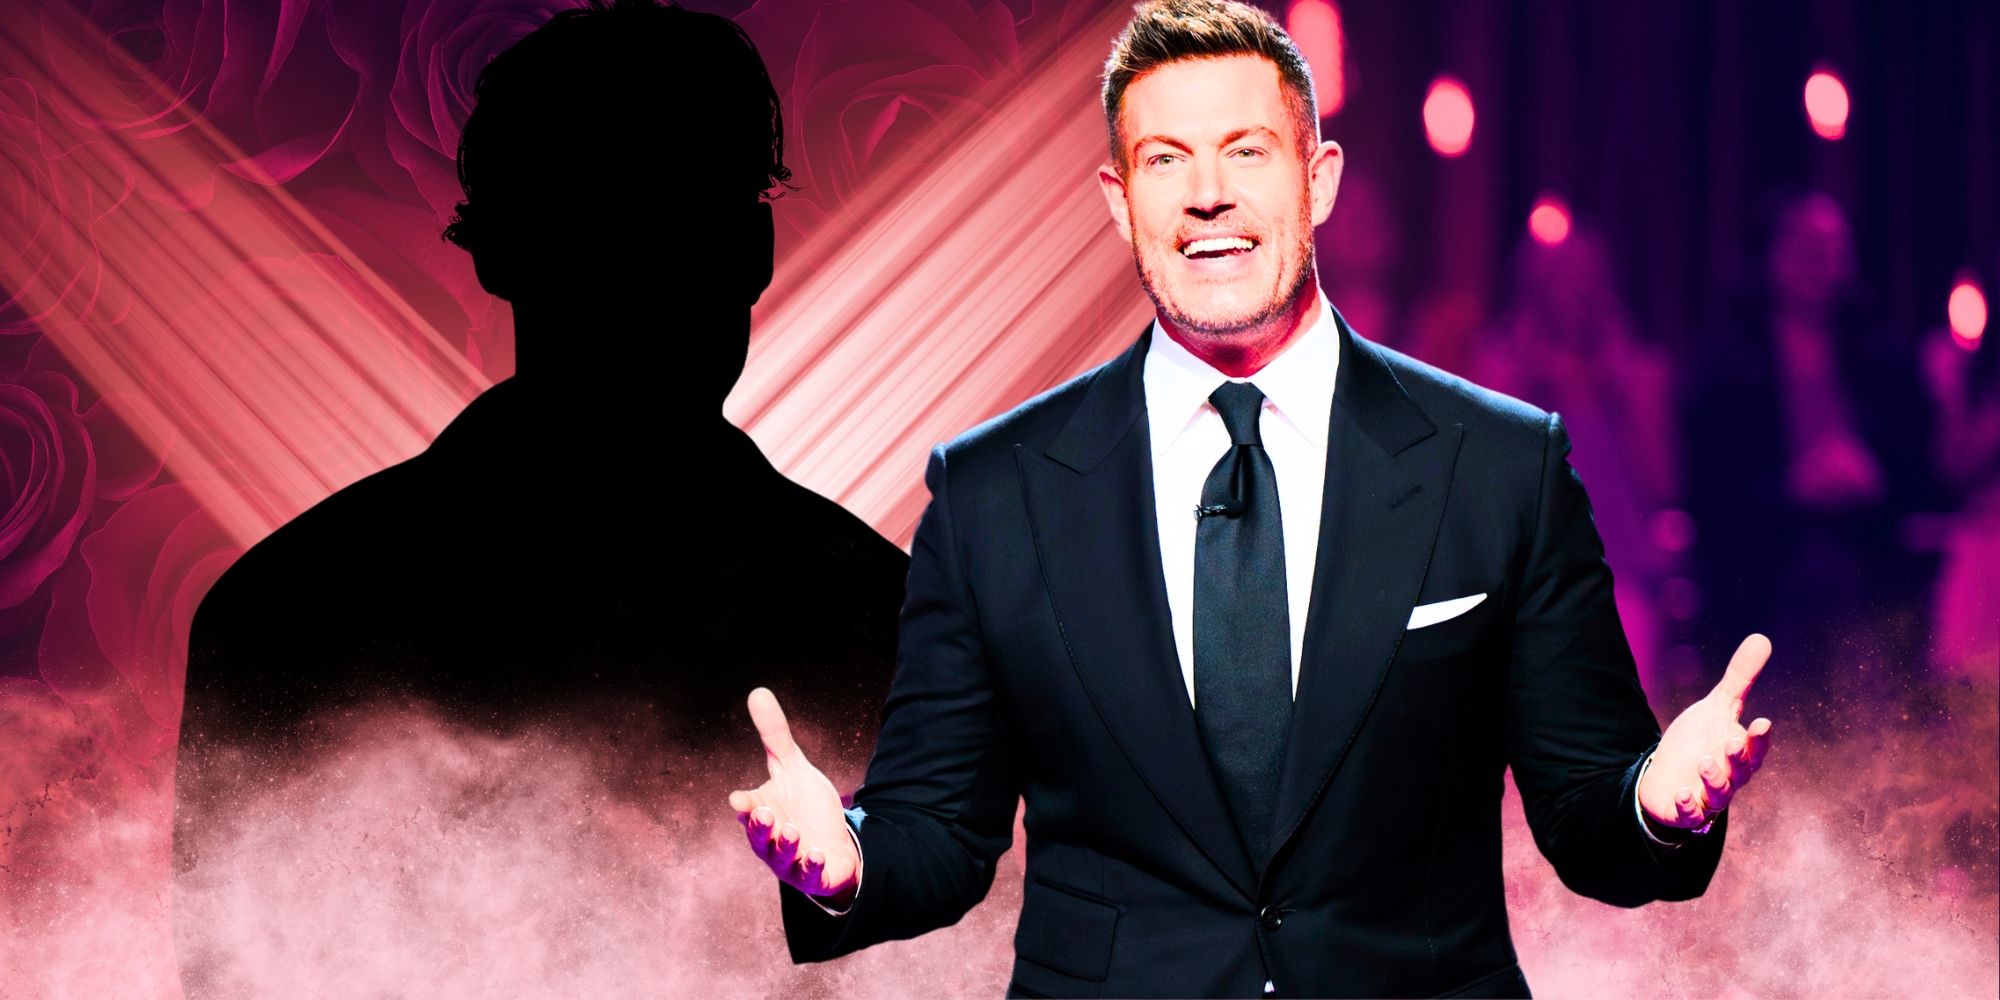 The Bachelor host Jesse Palmer, arms outstretched, with mystery person